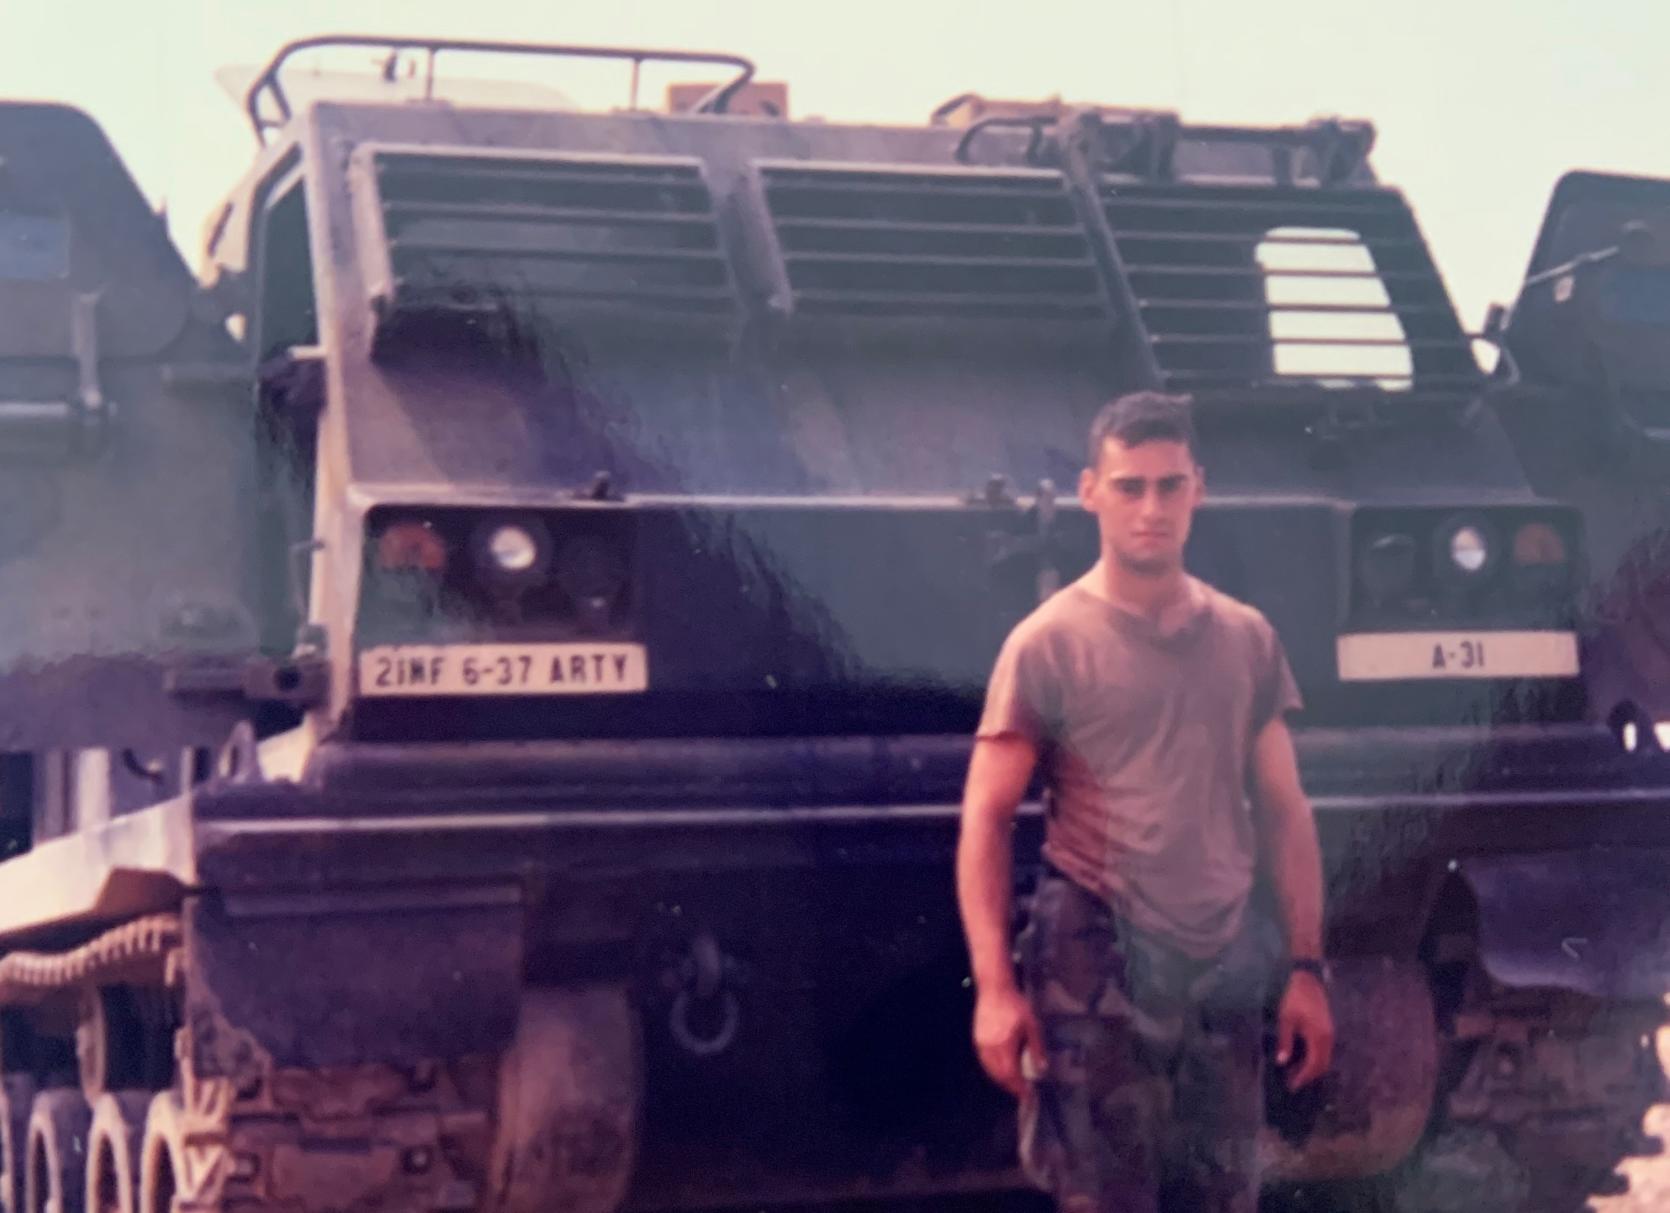 Richard Patchin stands in front of a military vehicle